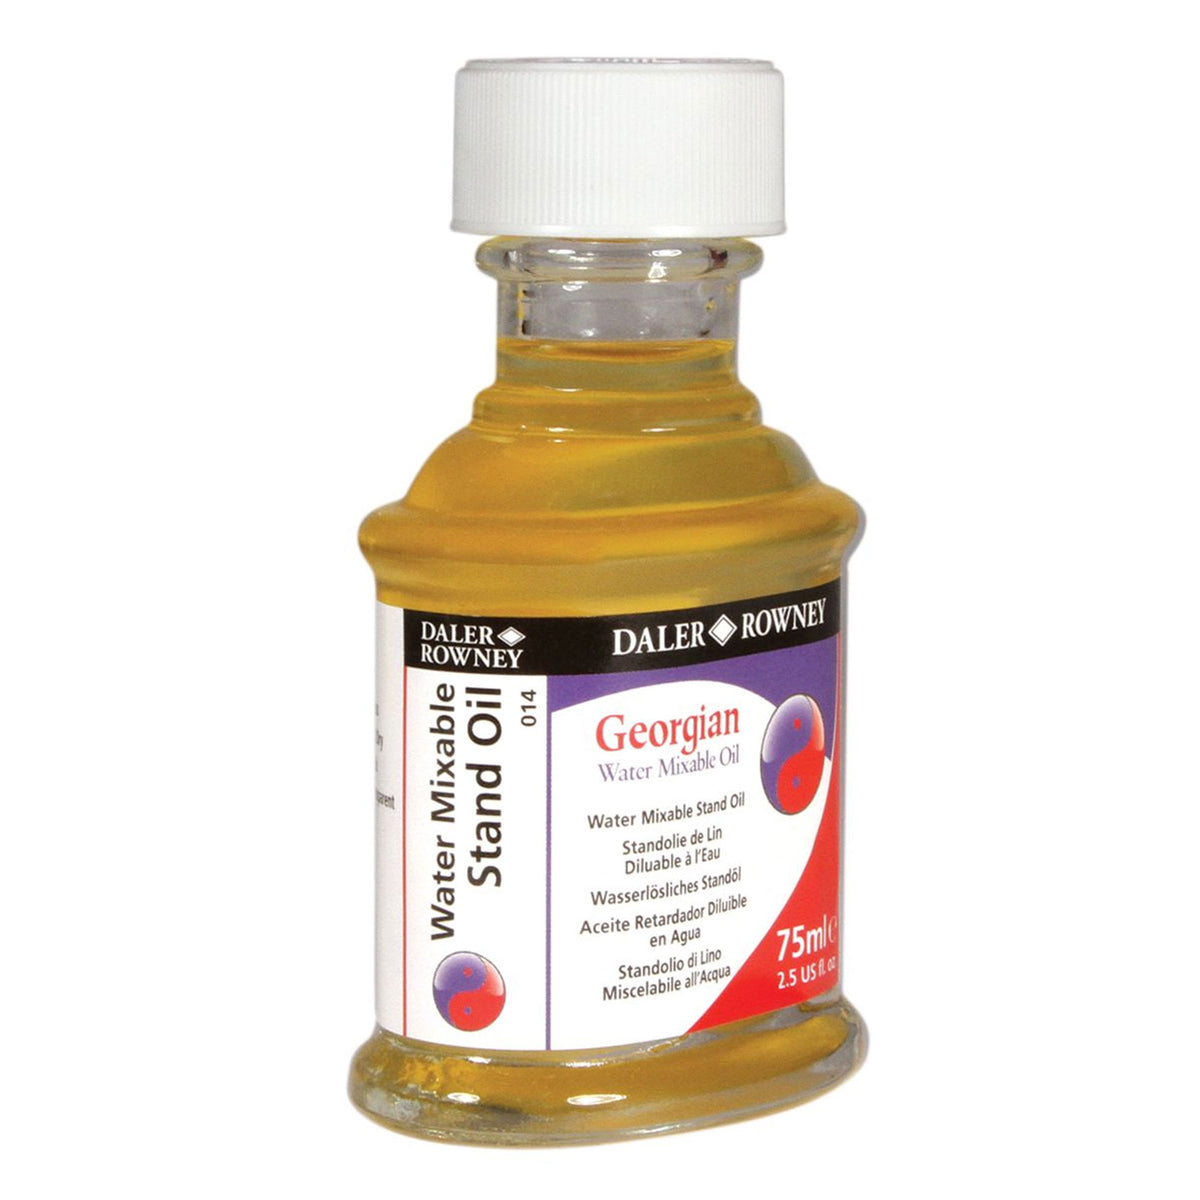 Daler-Rowney Water Mixable Oil - Stand Oil (75ml)